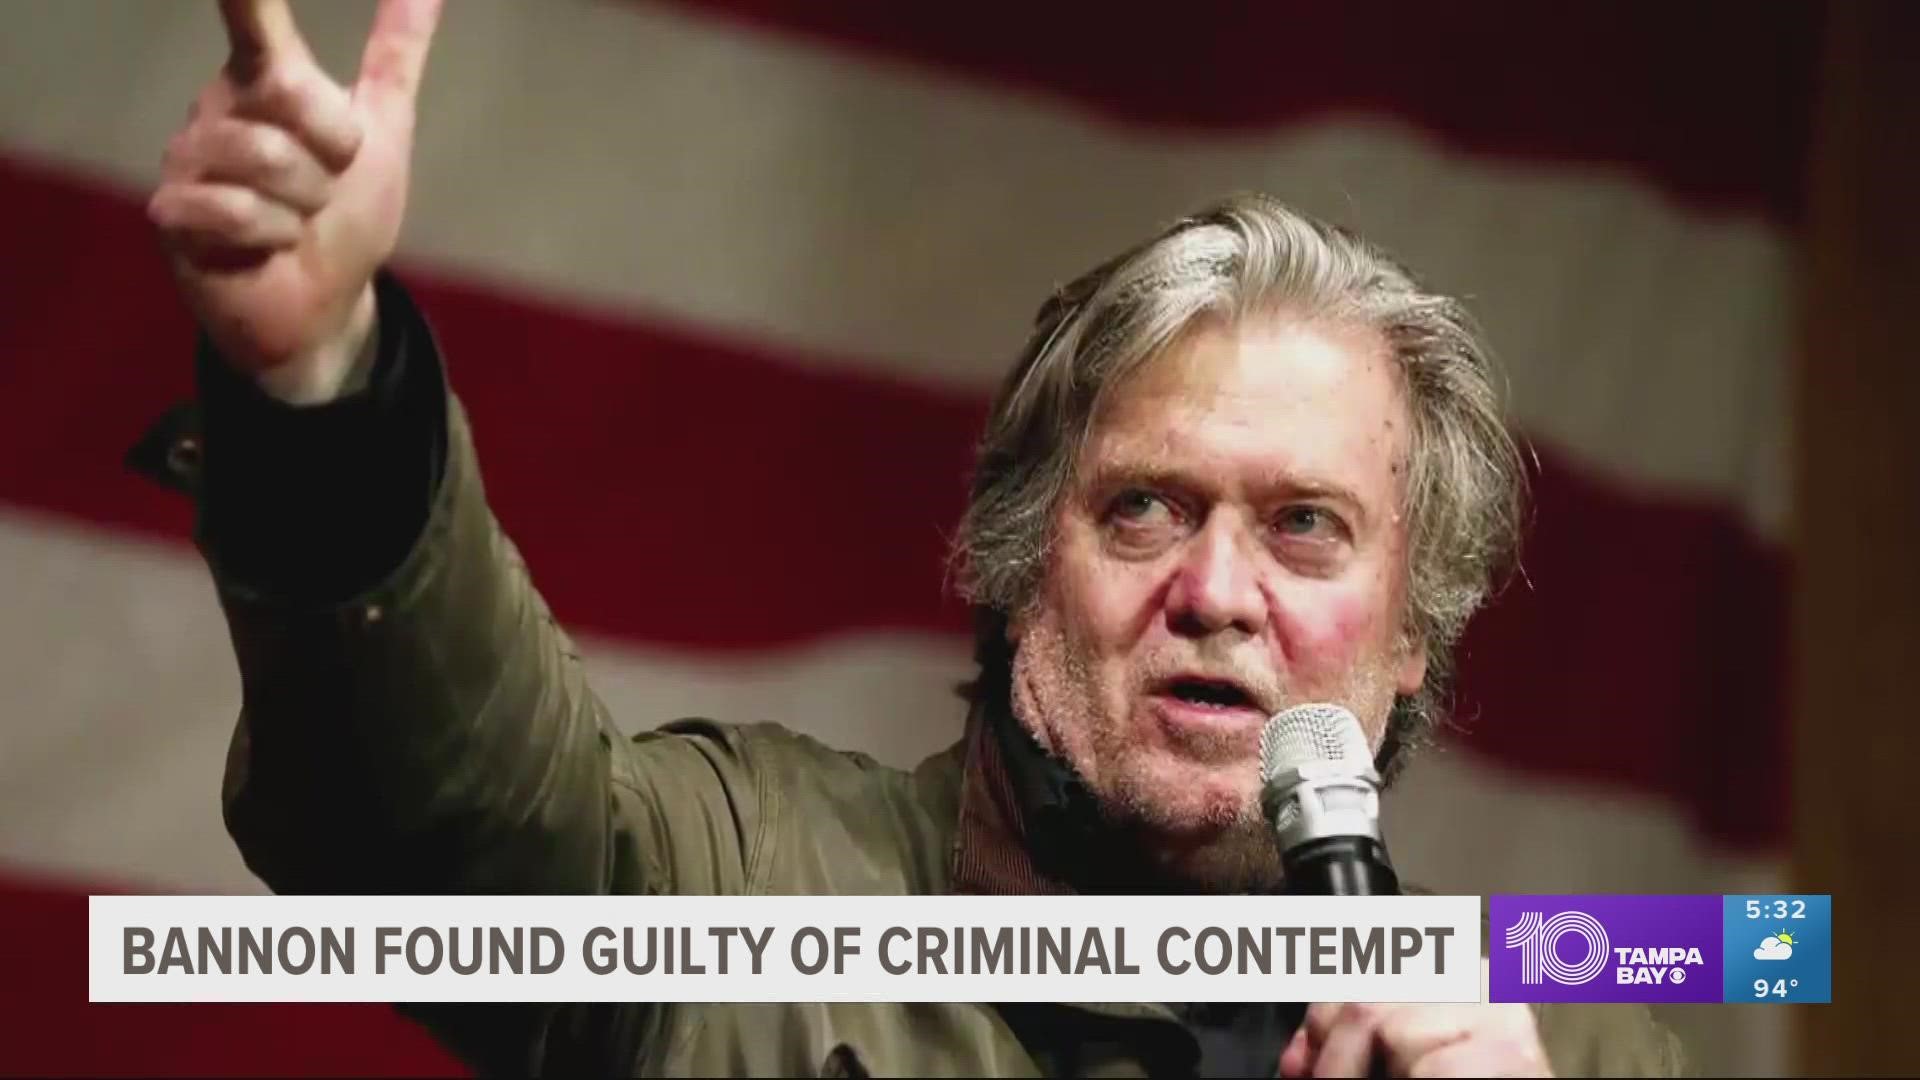 Longtime Trump ally Steve Bannon was found guilty of two counts of criminal contempt for refusing to appear before House Jan. 6 investigators.